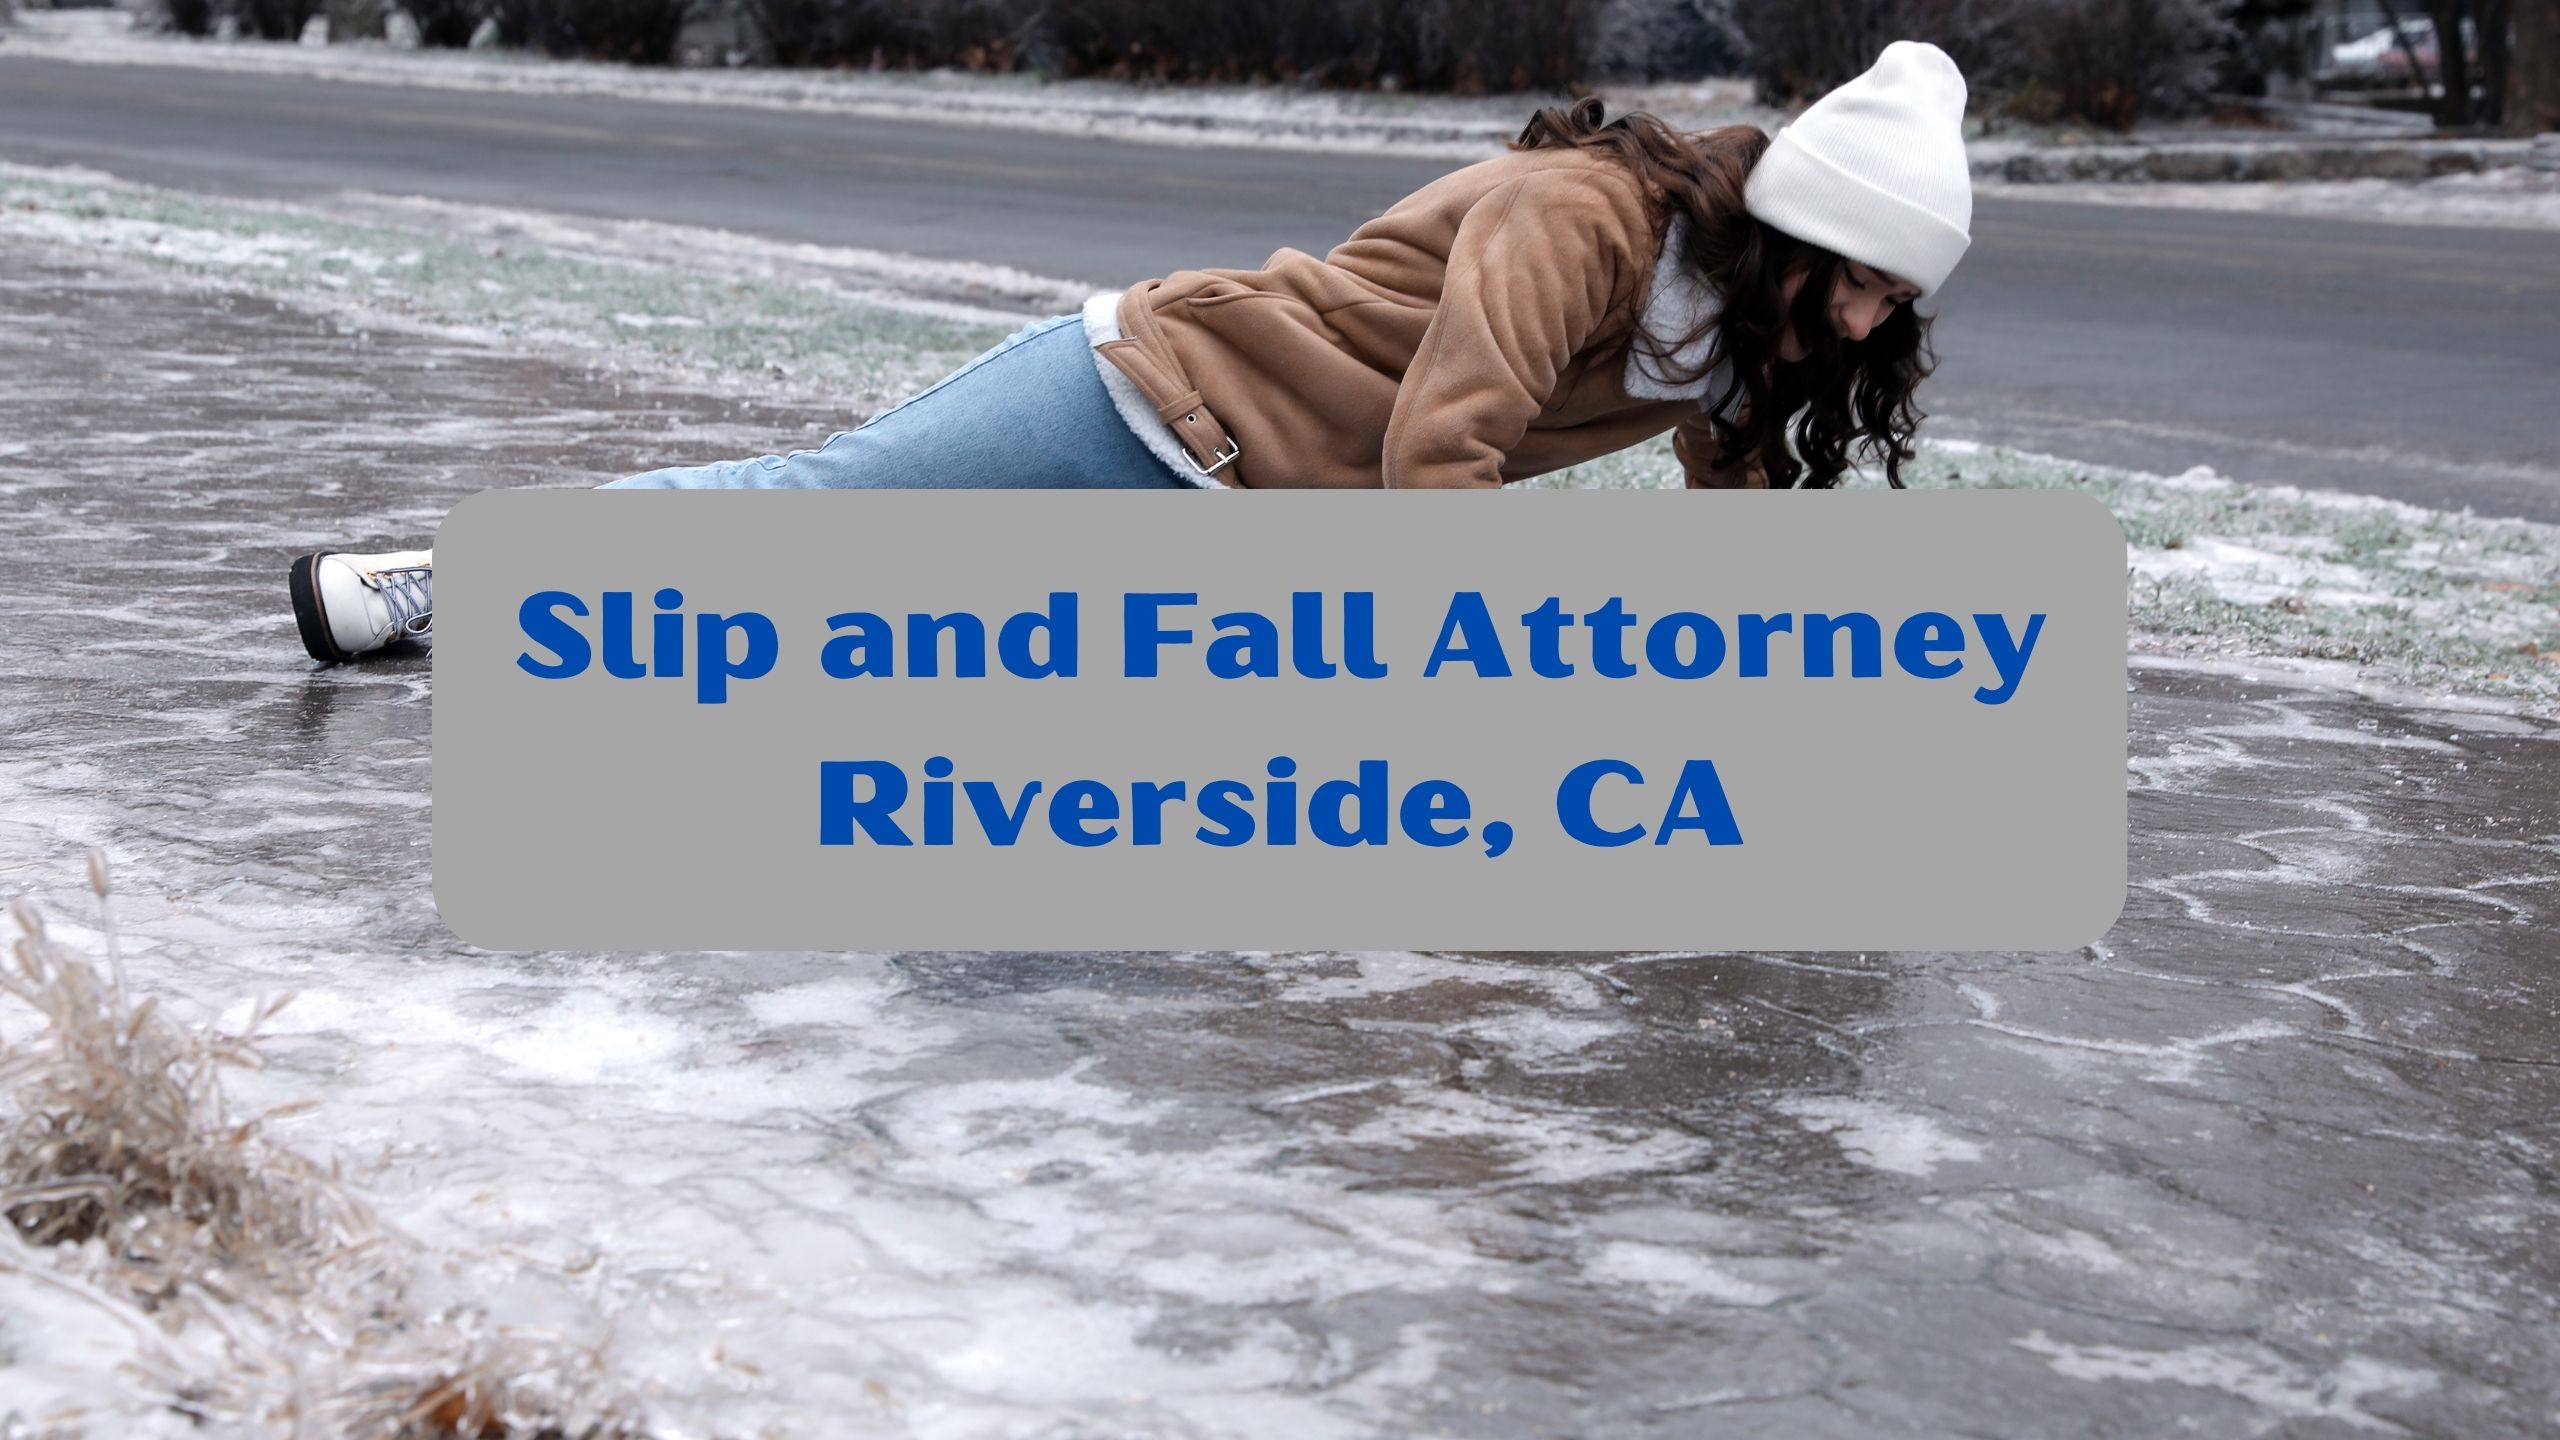 Slip and Fall Attorney Riverside